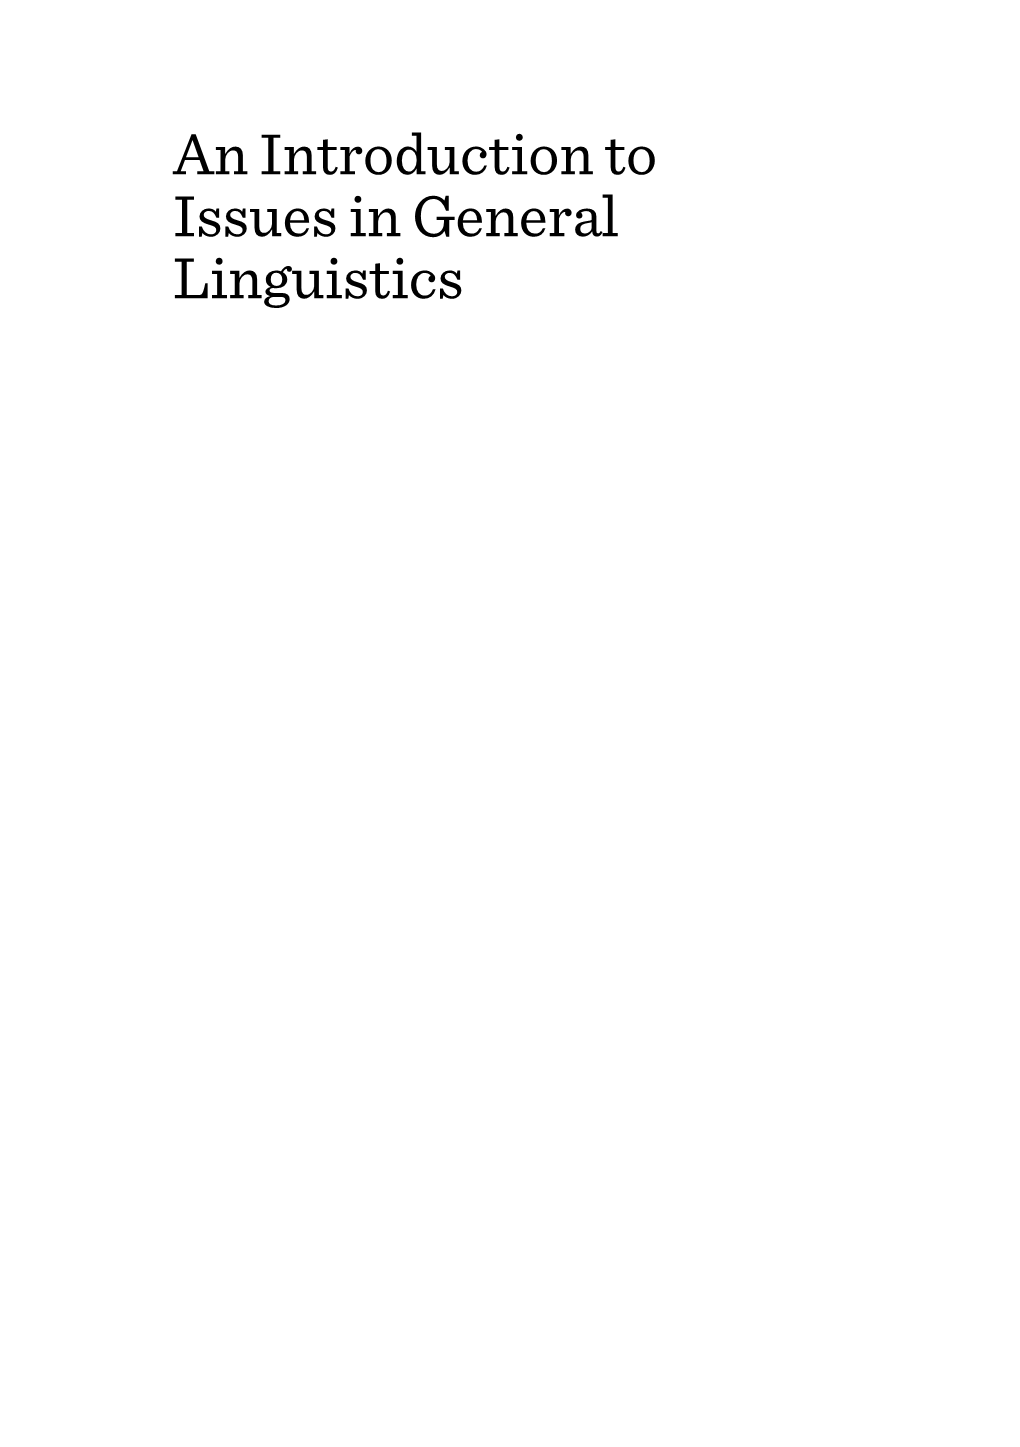 An Introduction to Issues in General Linguistics